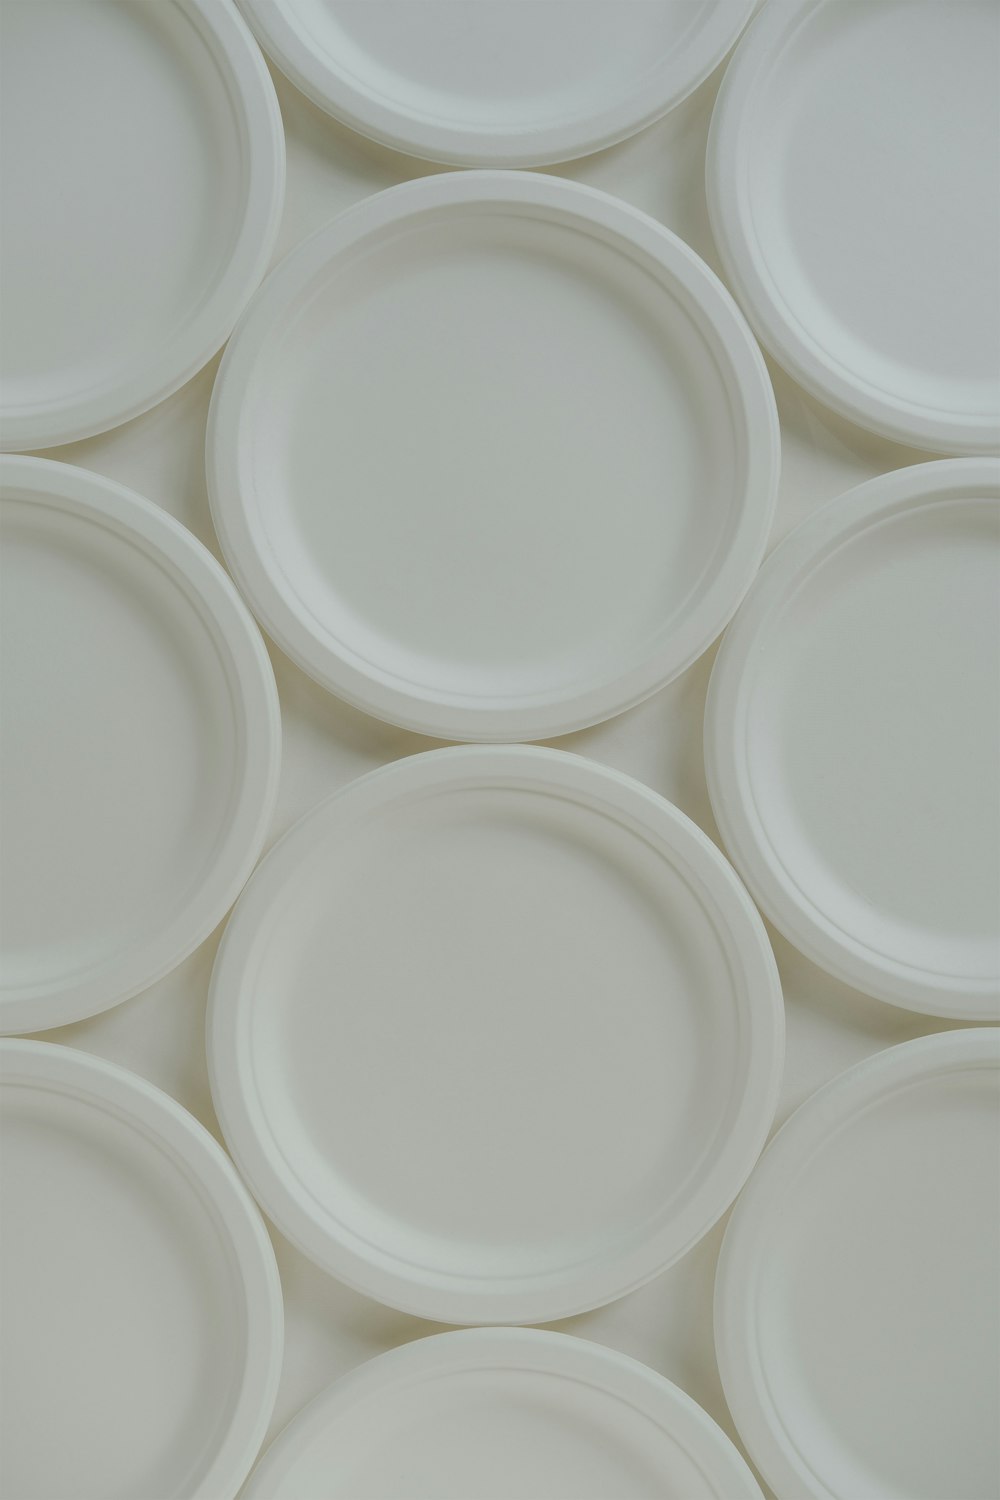 a bunch of white plates stacked on top of each other